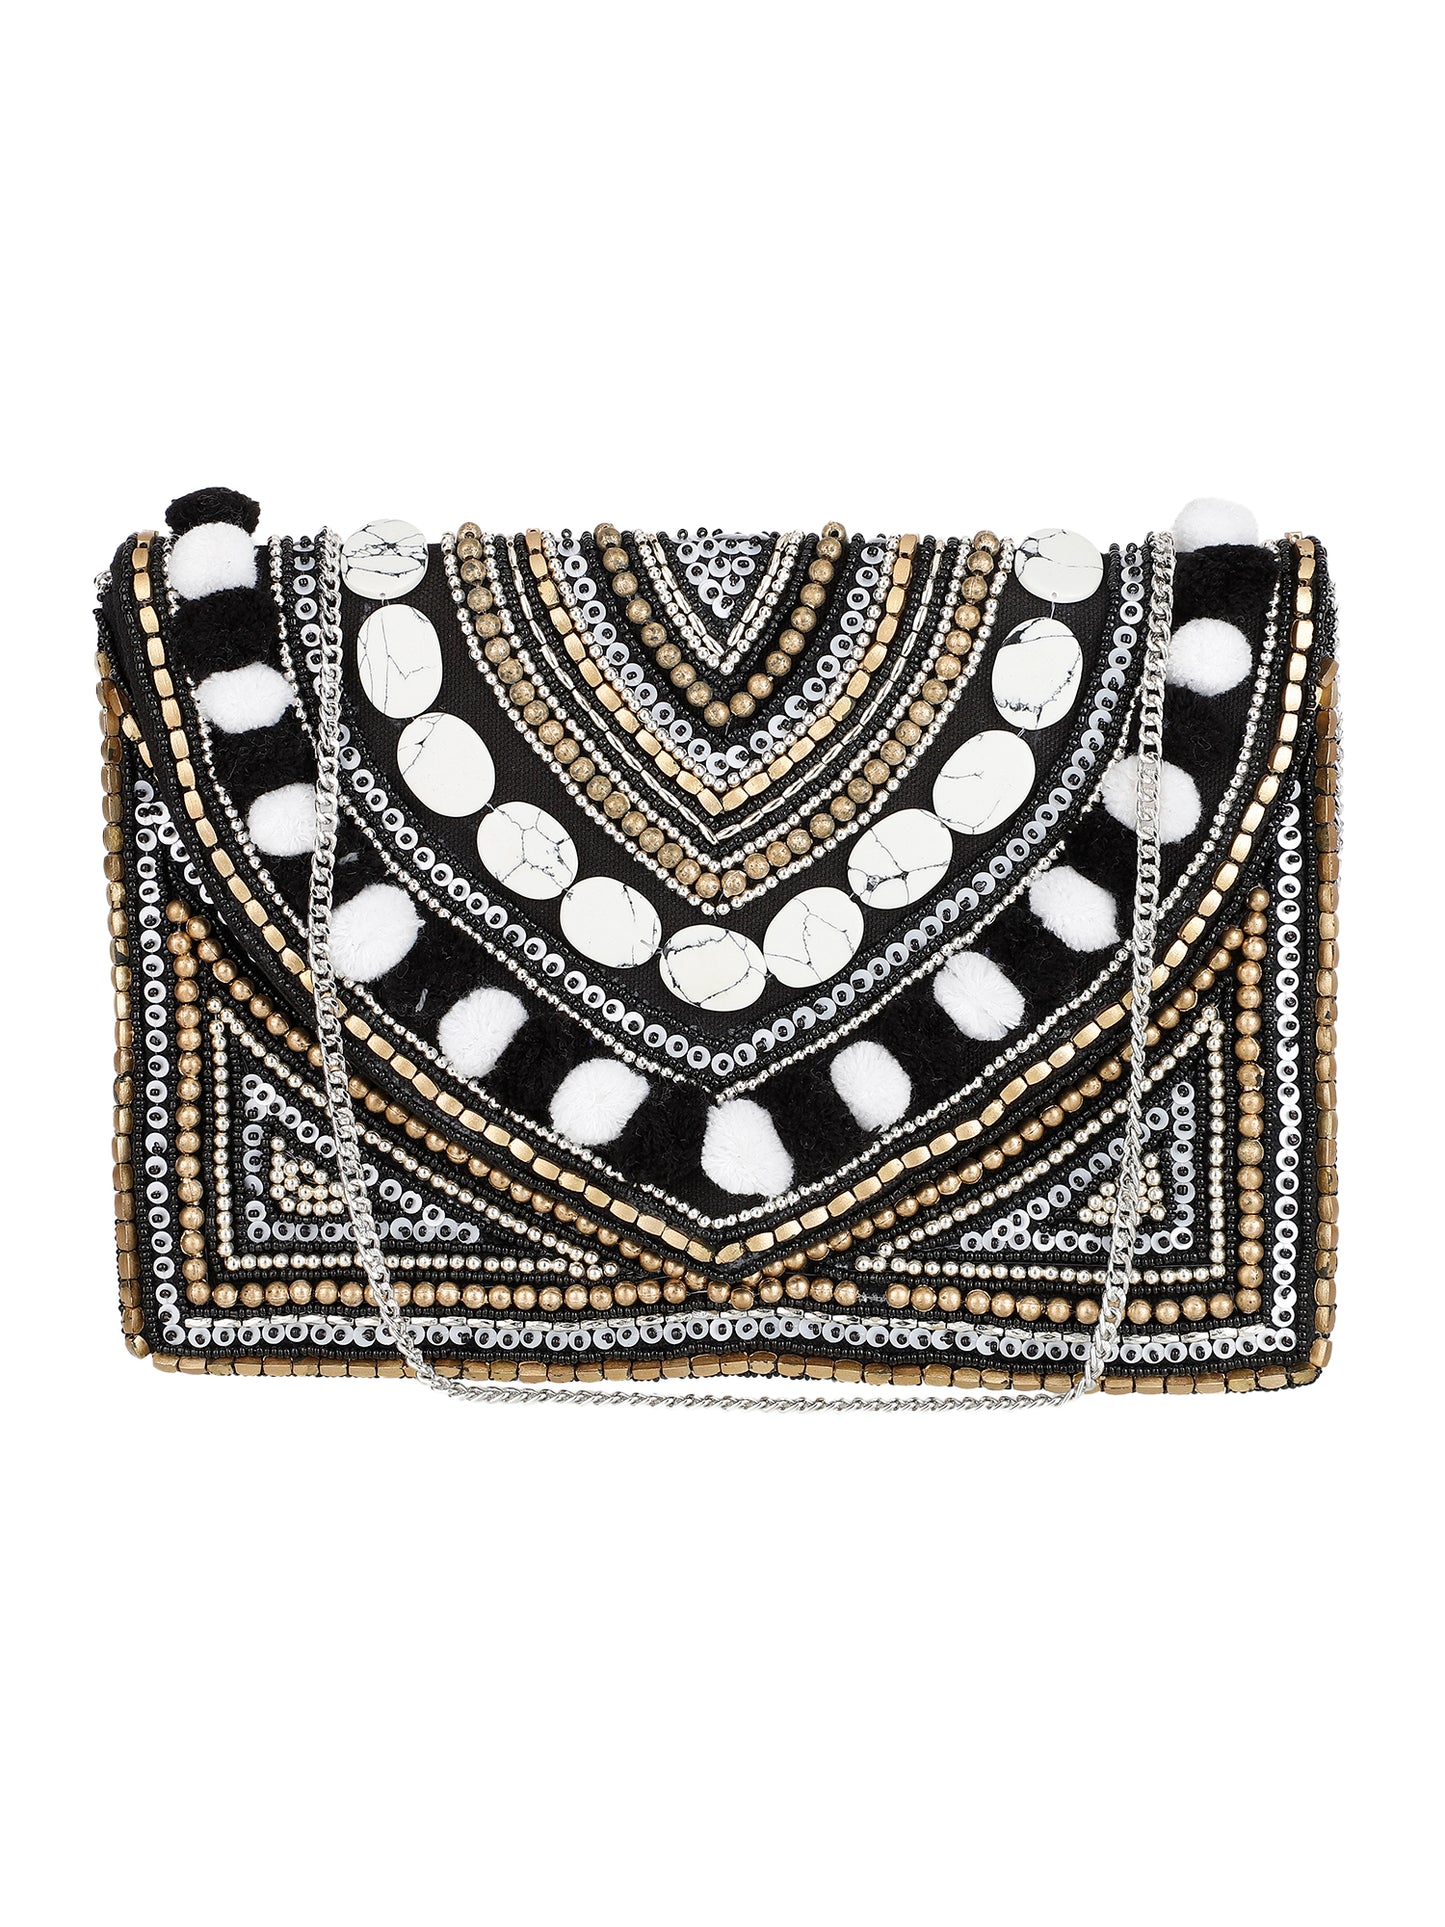 Embroidered White and Black Clutch